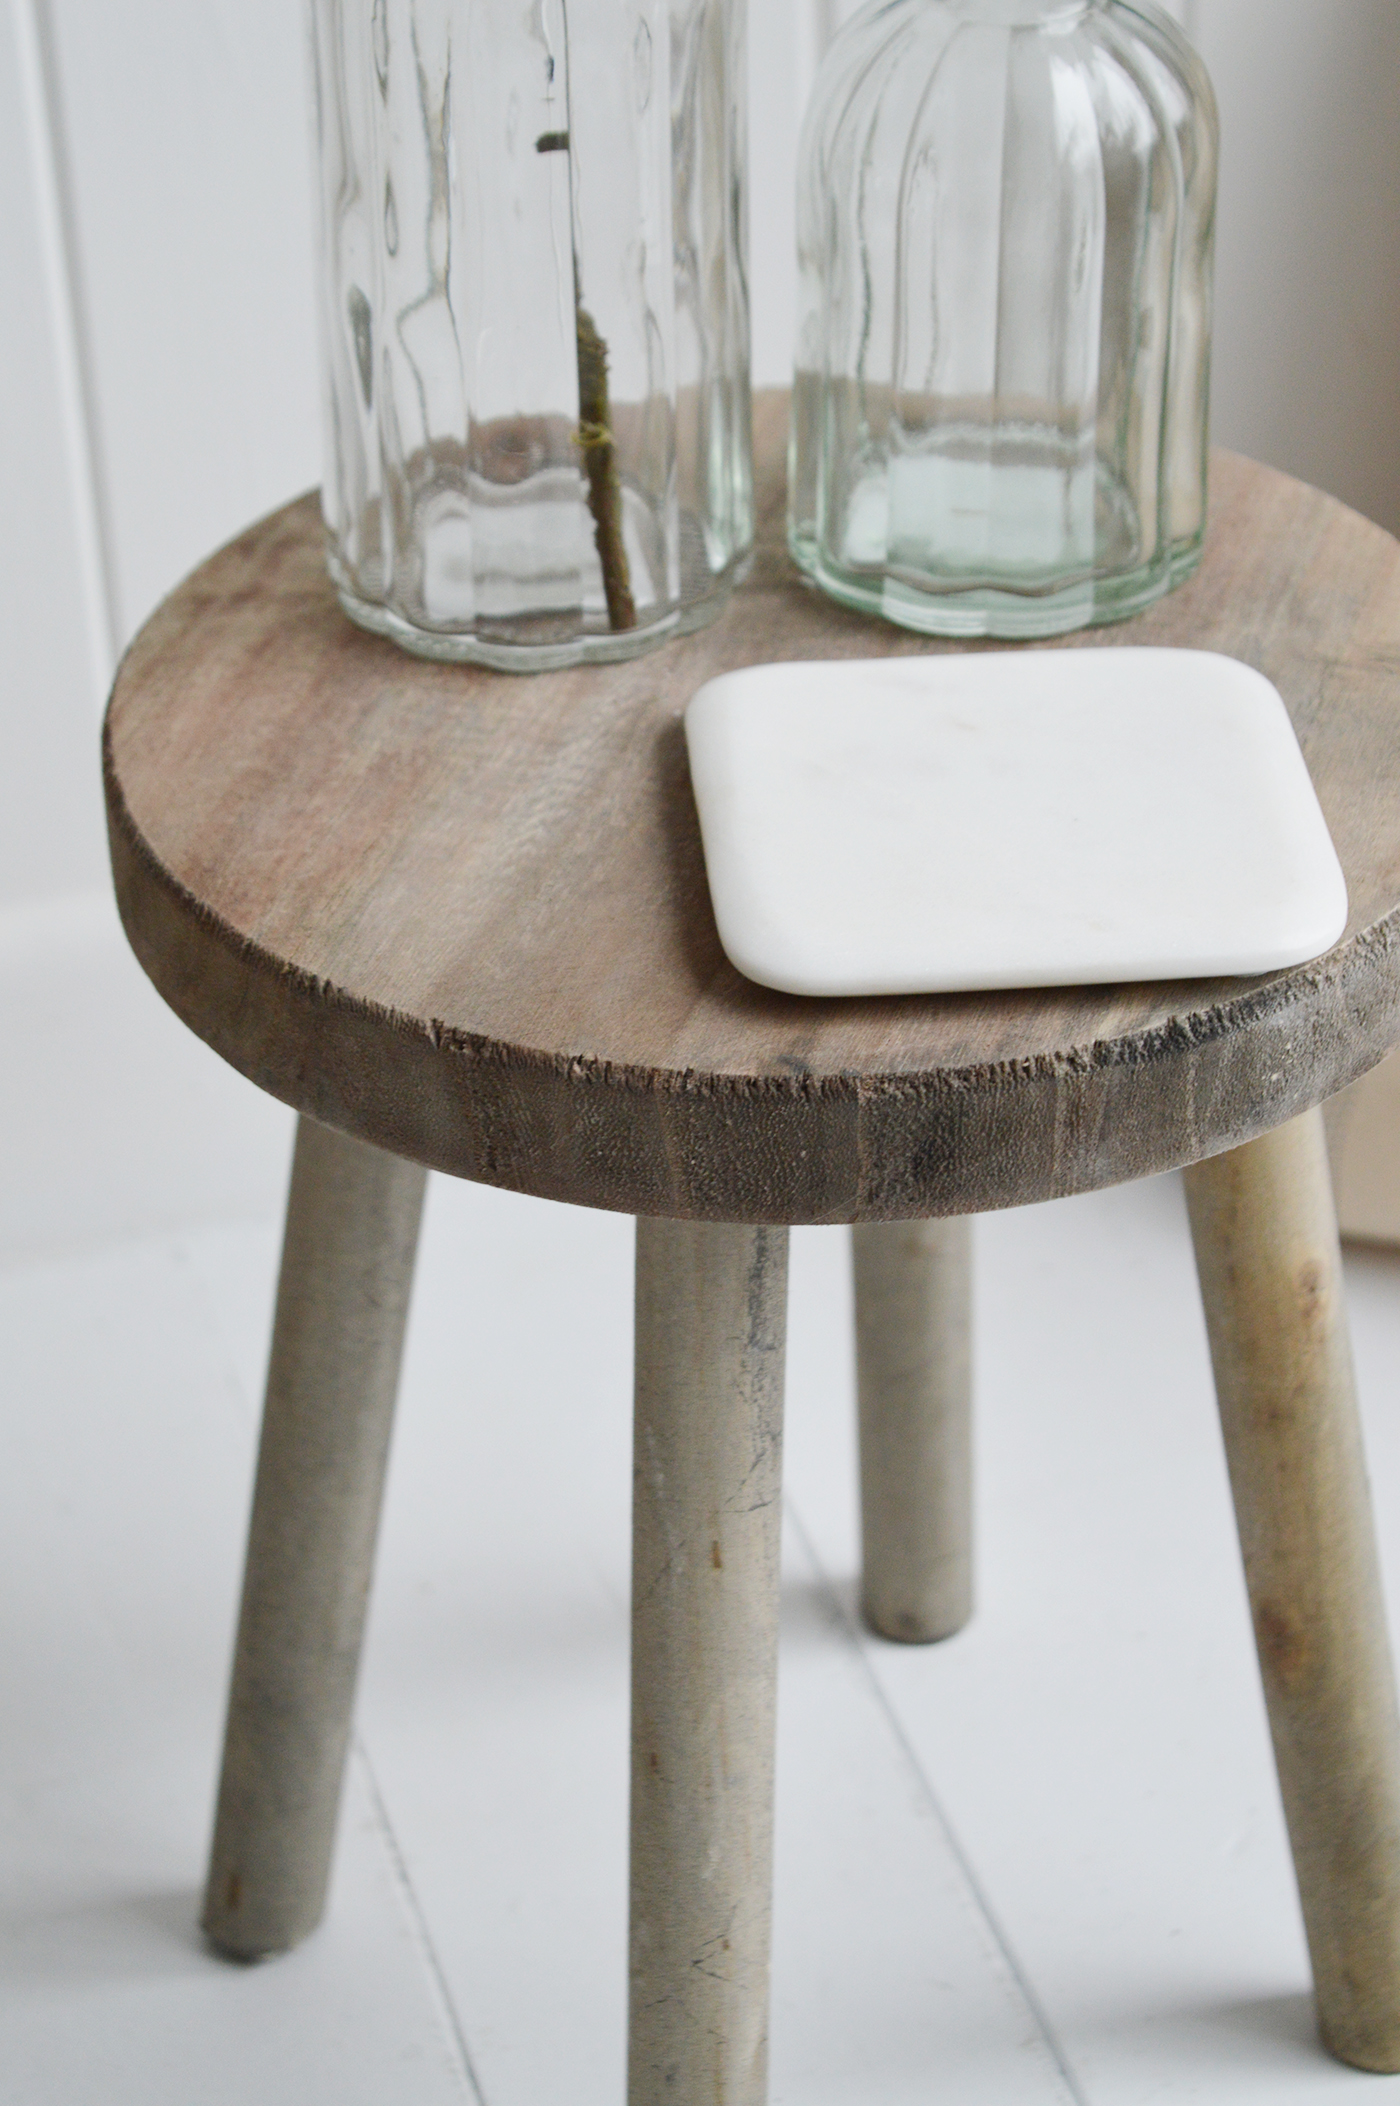 Pawtucket Grey Wooden round Stool Side Table, milking stool for coastal and country interiors from The White Lighthouse. Bathroom, Living Room, Bedroom and Hallway Furniture for beautiful homes